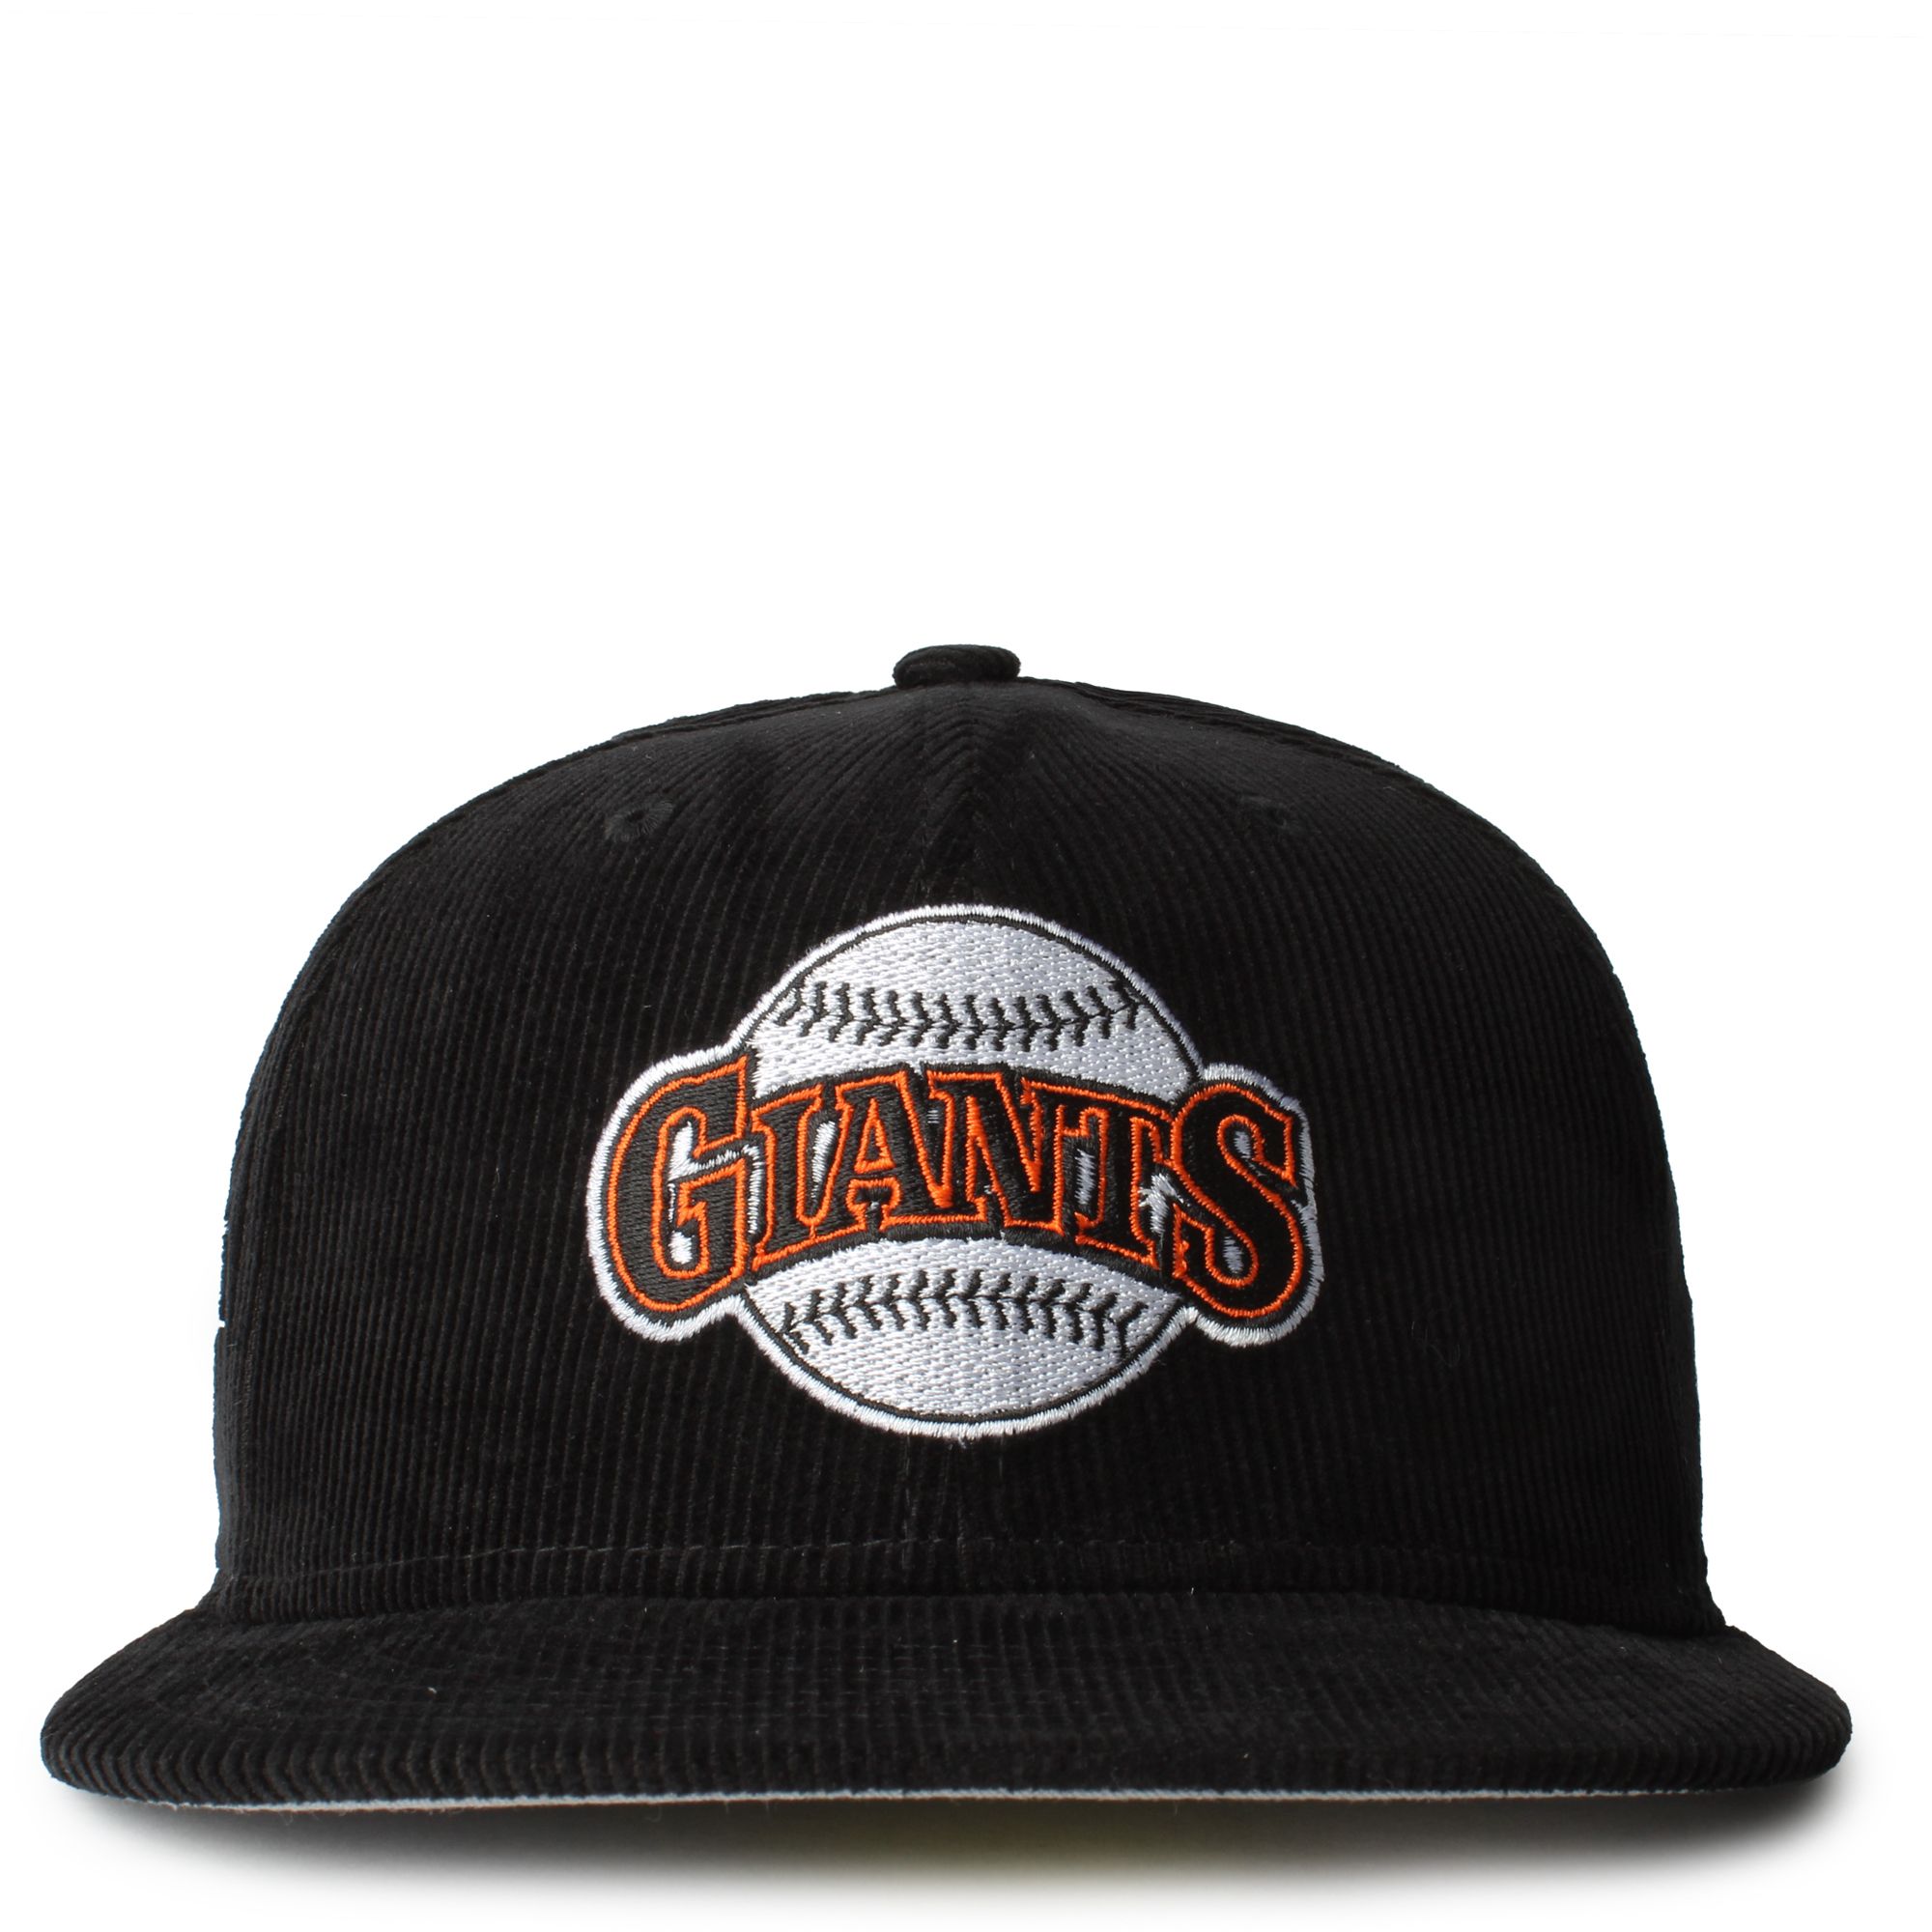 Shop the MLB Throwback Collection by New Era Cap. These hats